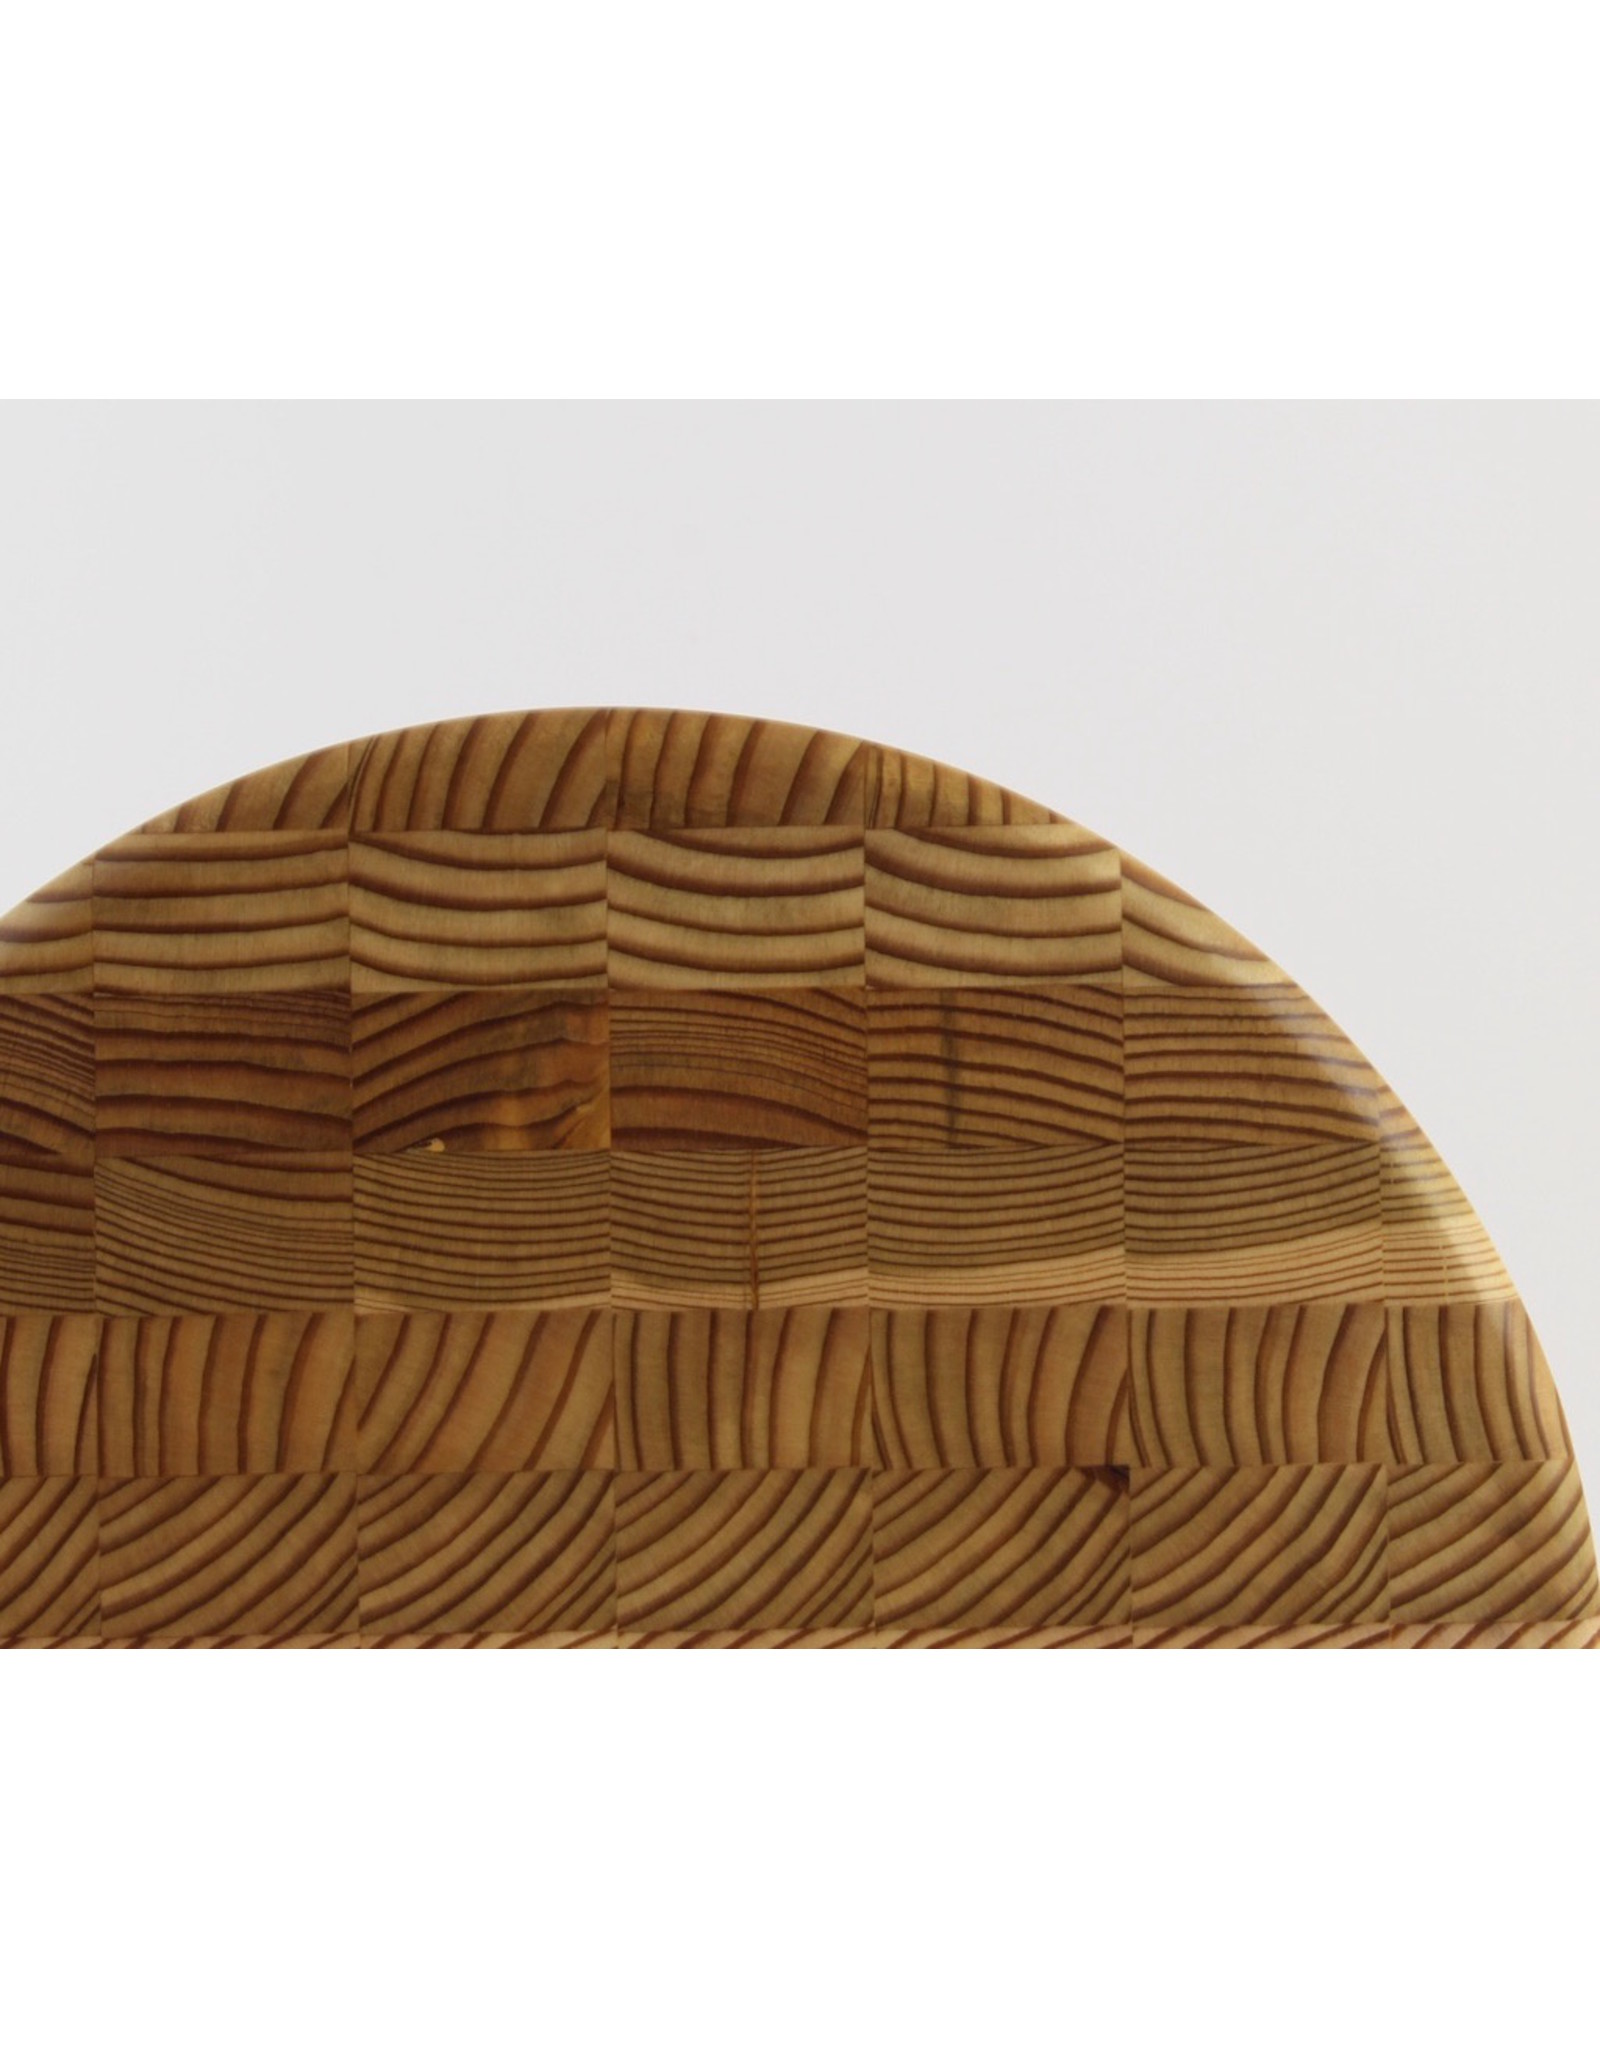 Larch Wood Round Cheese Board (10x2) by Larch Wood